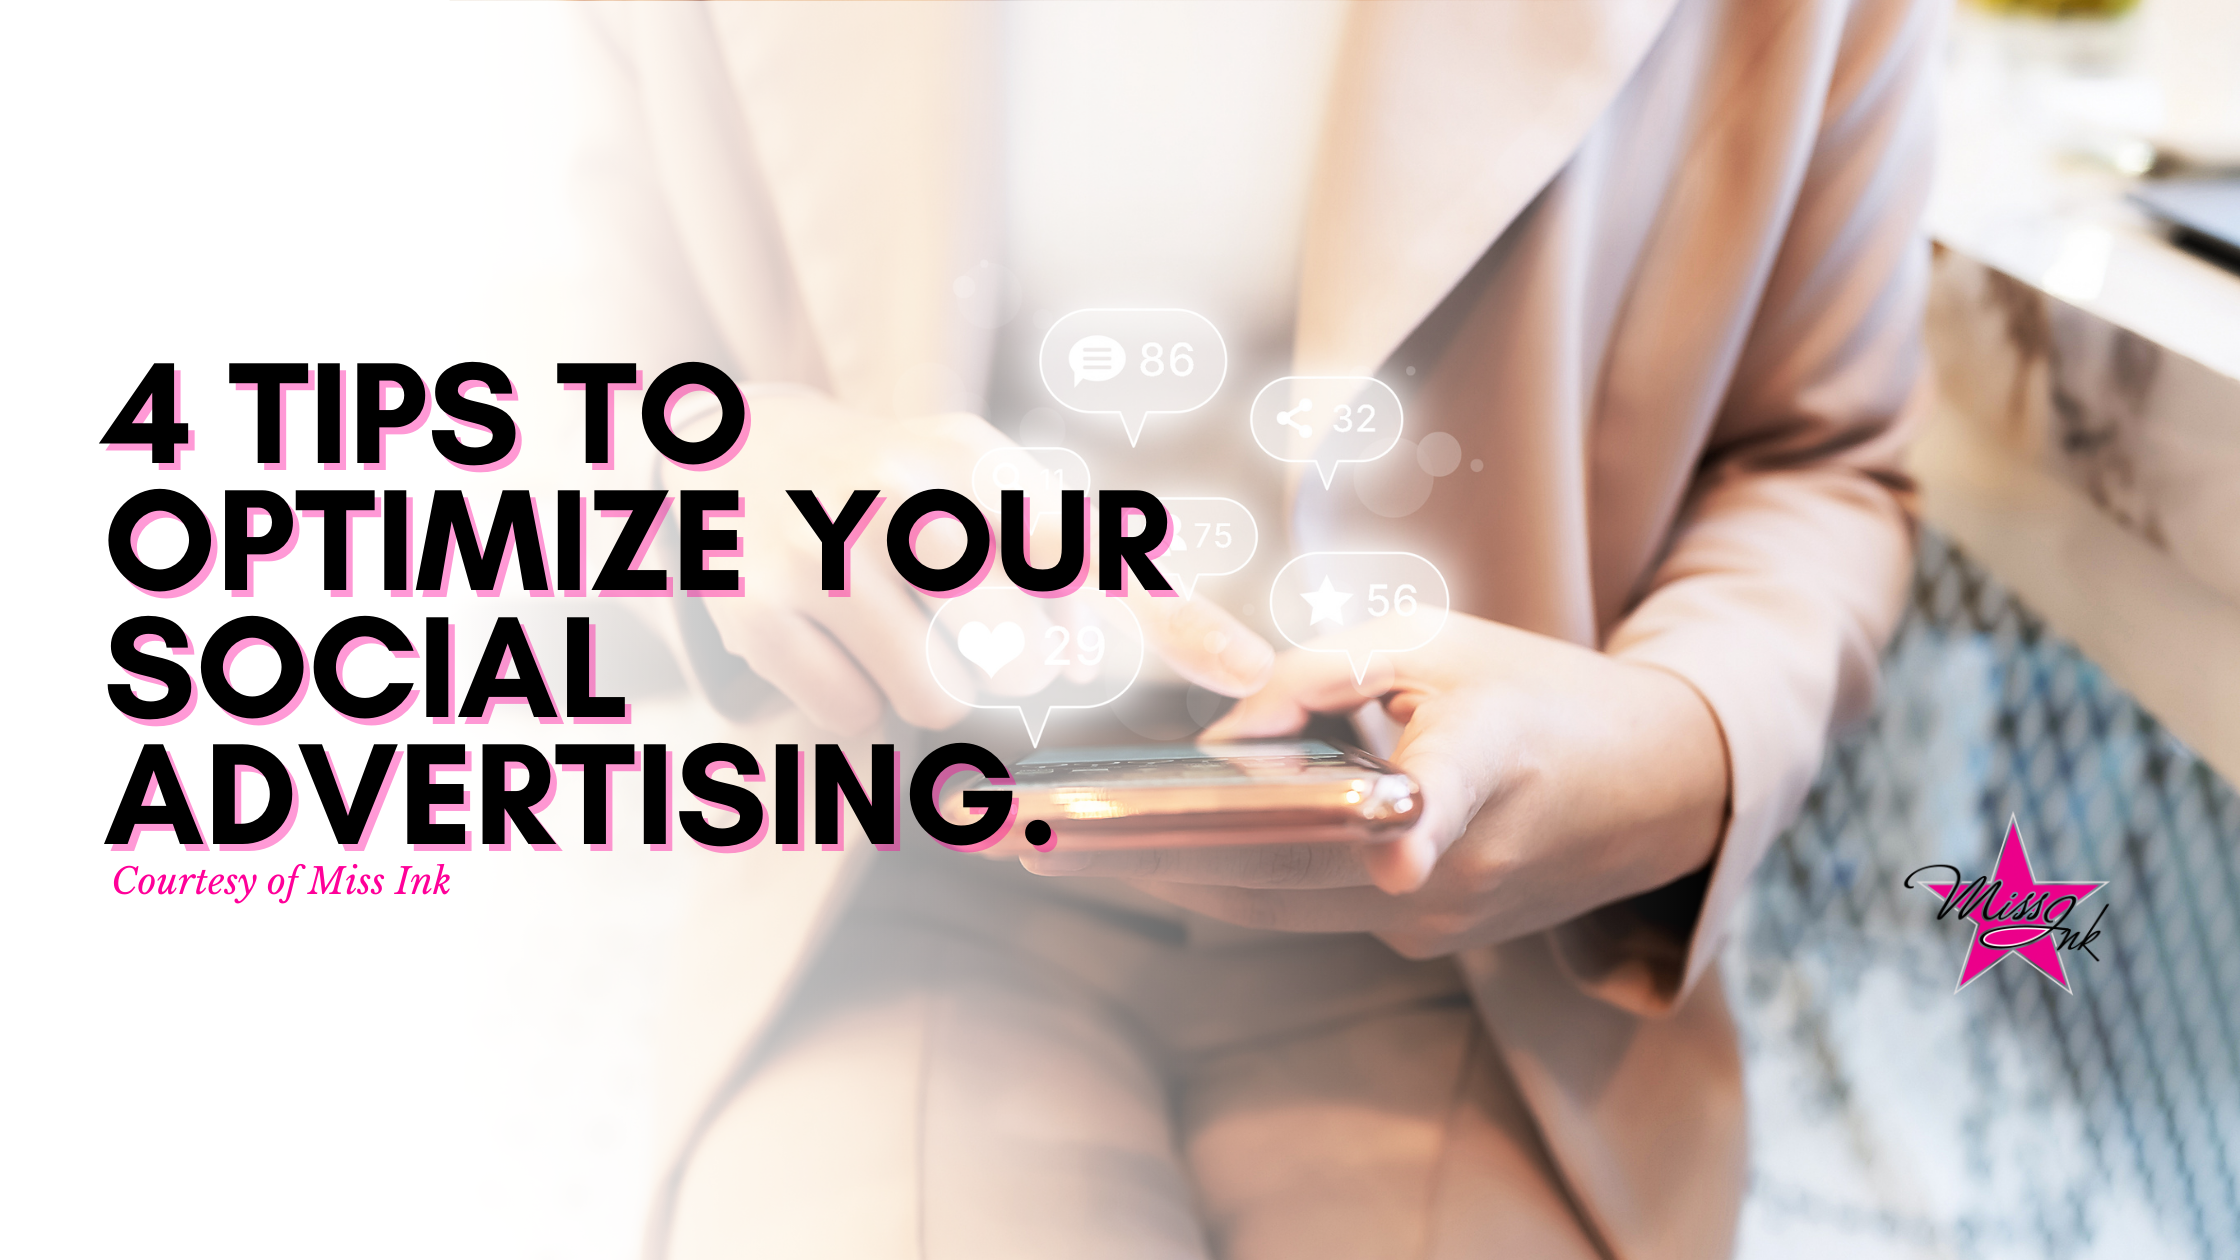 4 Tips To Optimize Your Social Advertising.